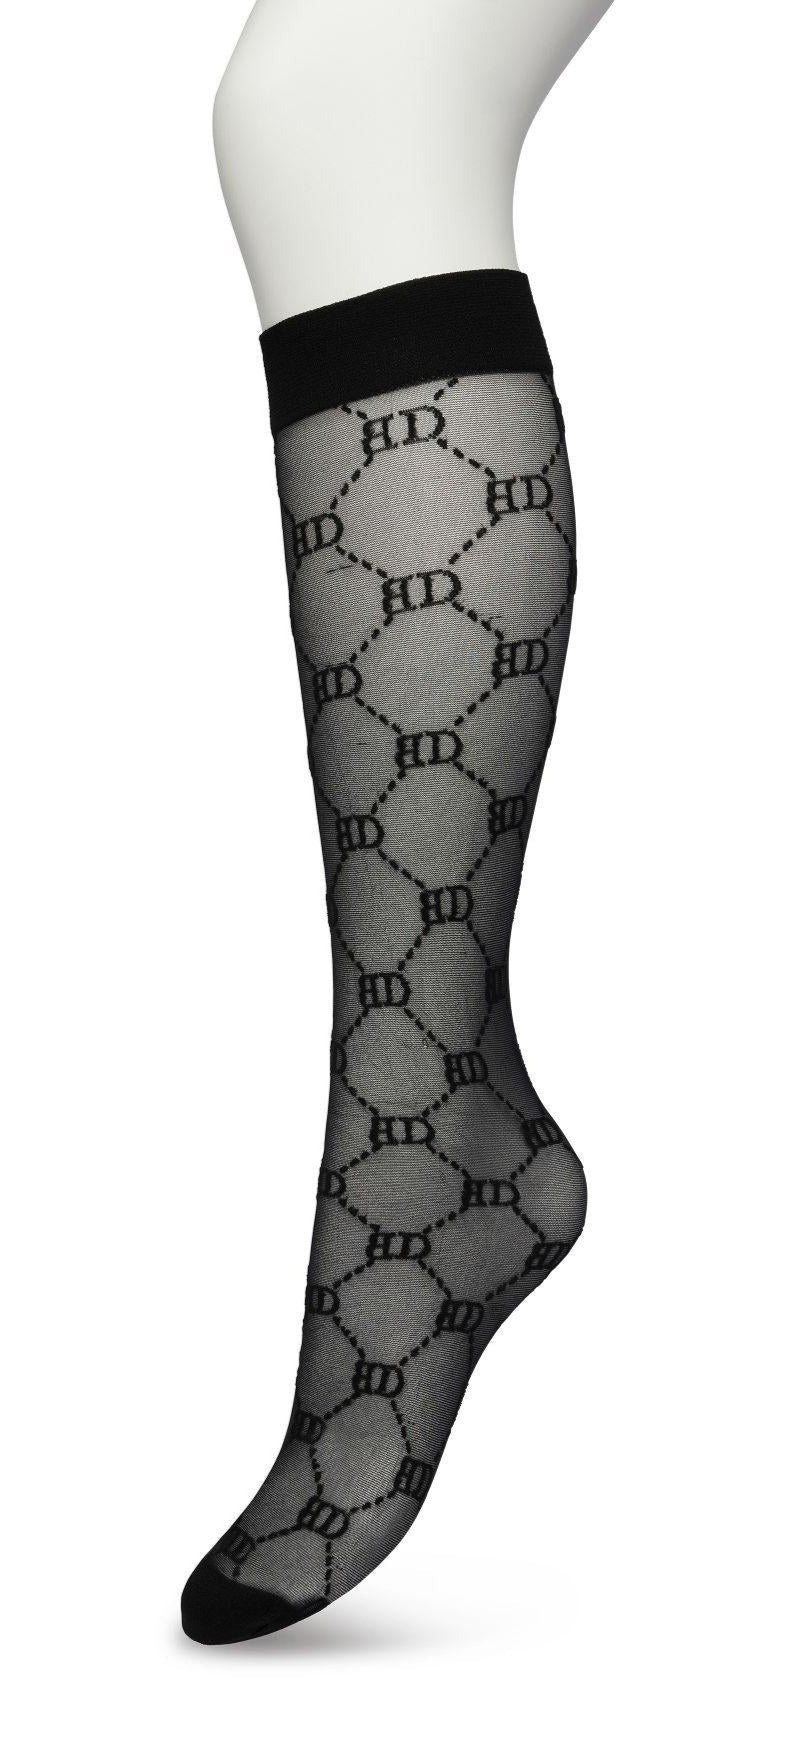 Bonnie Doon BP221801 Logo Knee-highs - Sheer black Gucci inspired fashion knee high socks with a woven dotted diamond style pattern with BD for Bonnie Doon